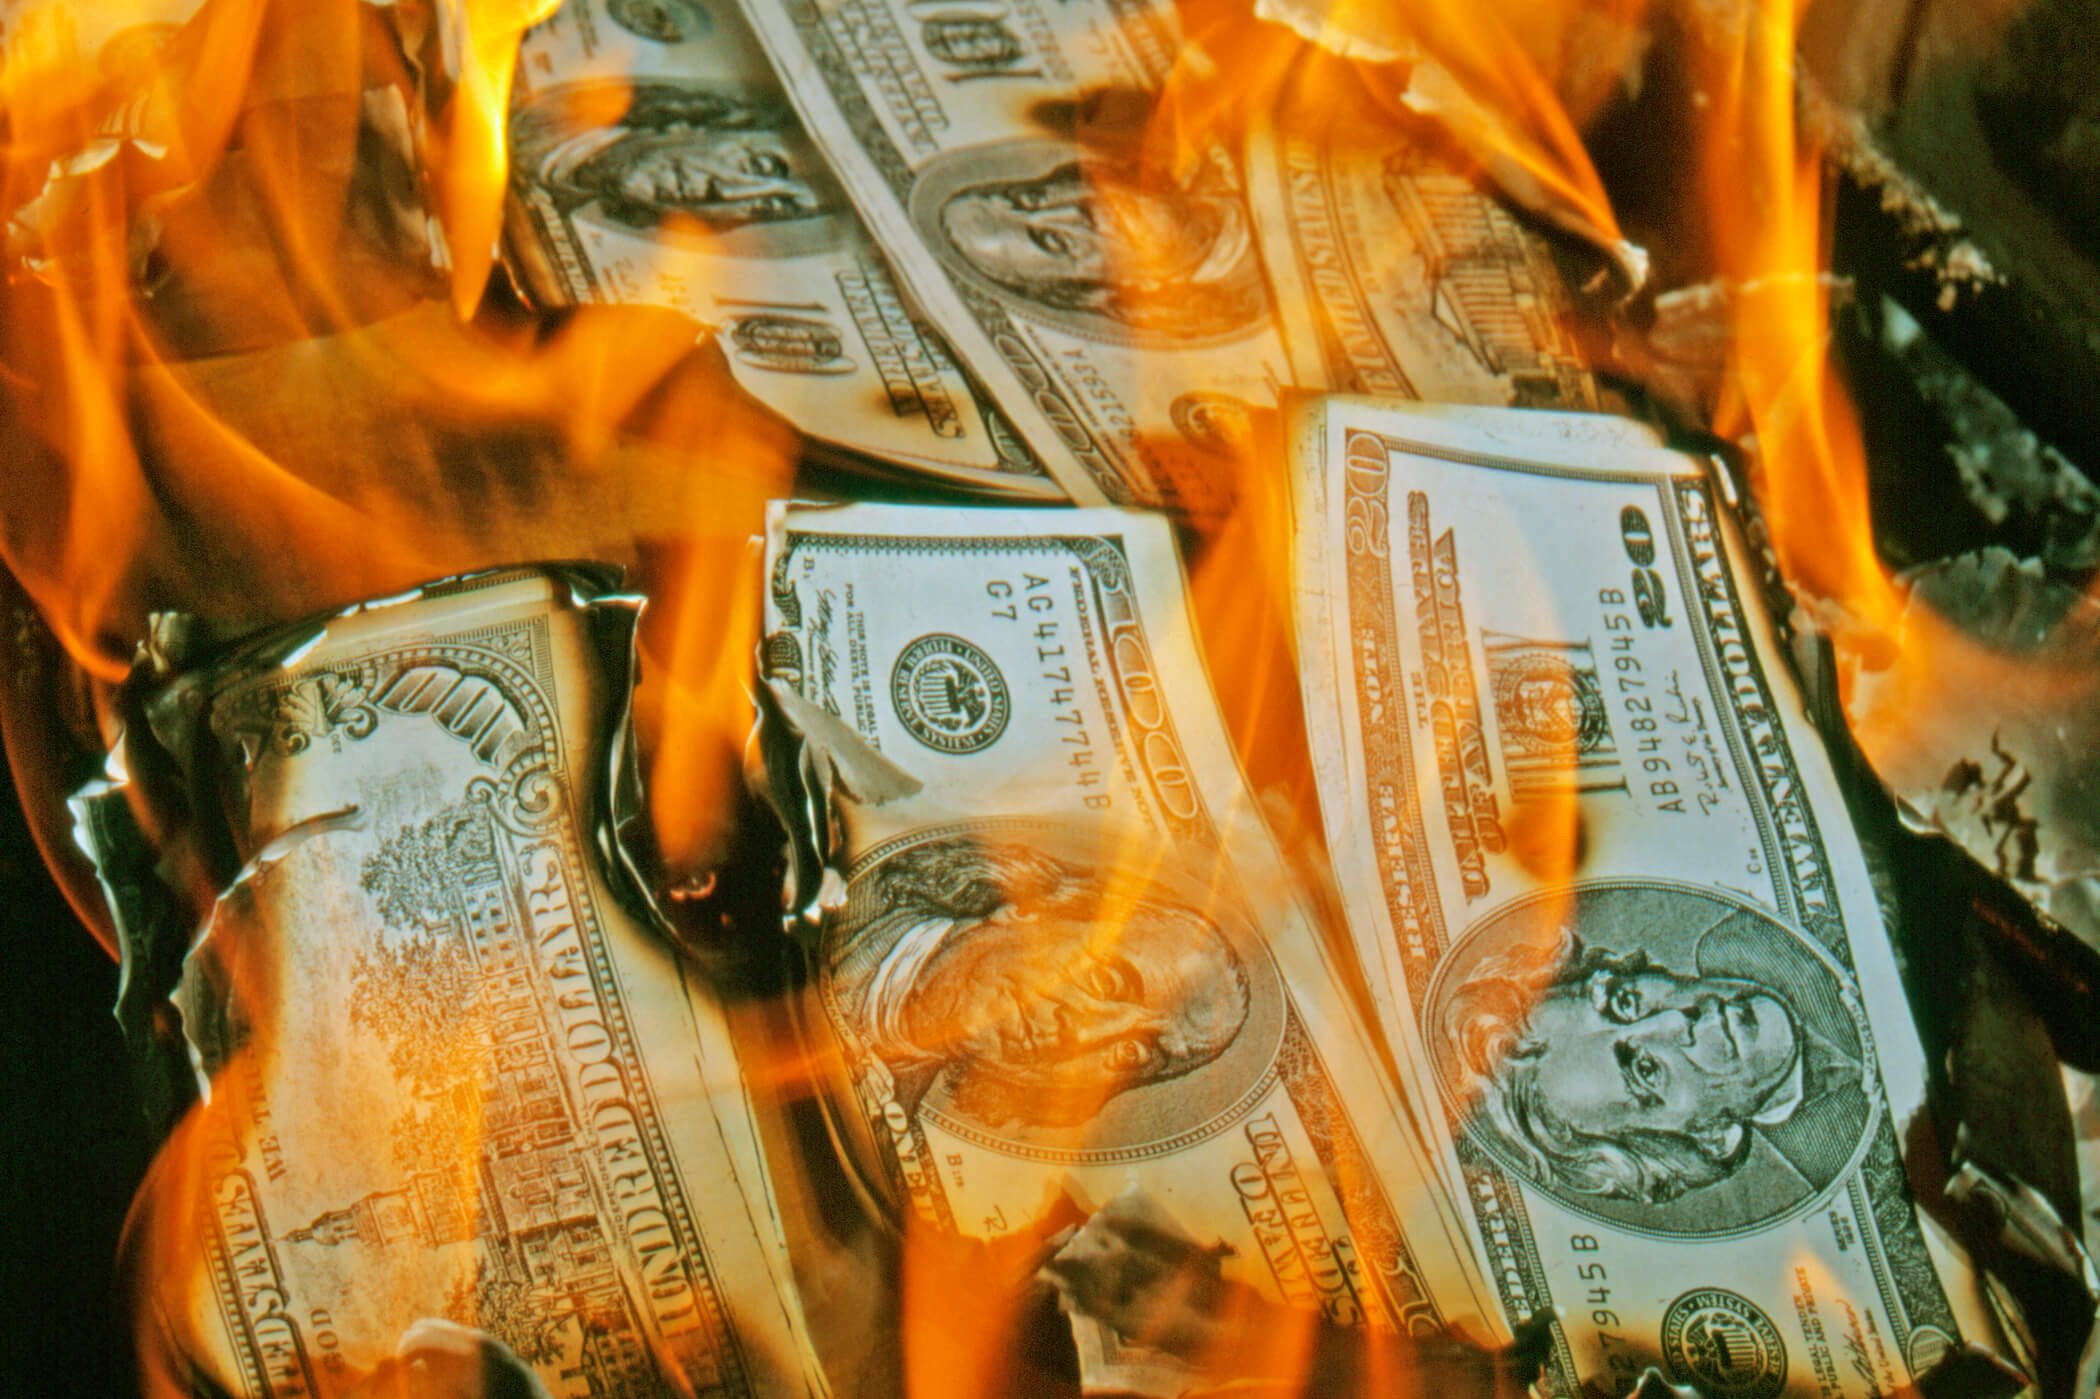 Stacks of money burning on a fire